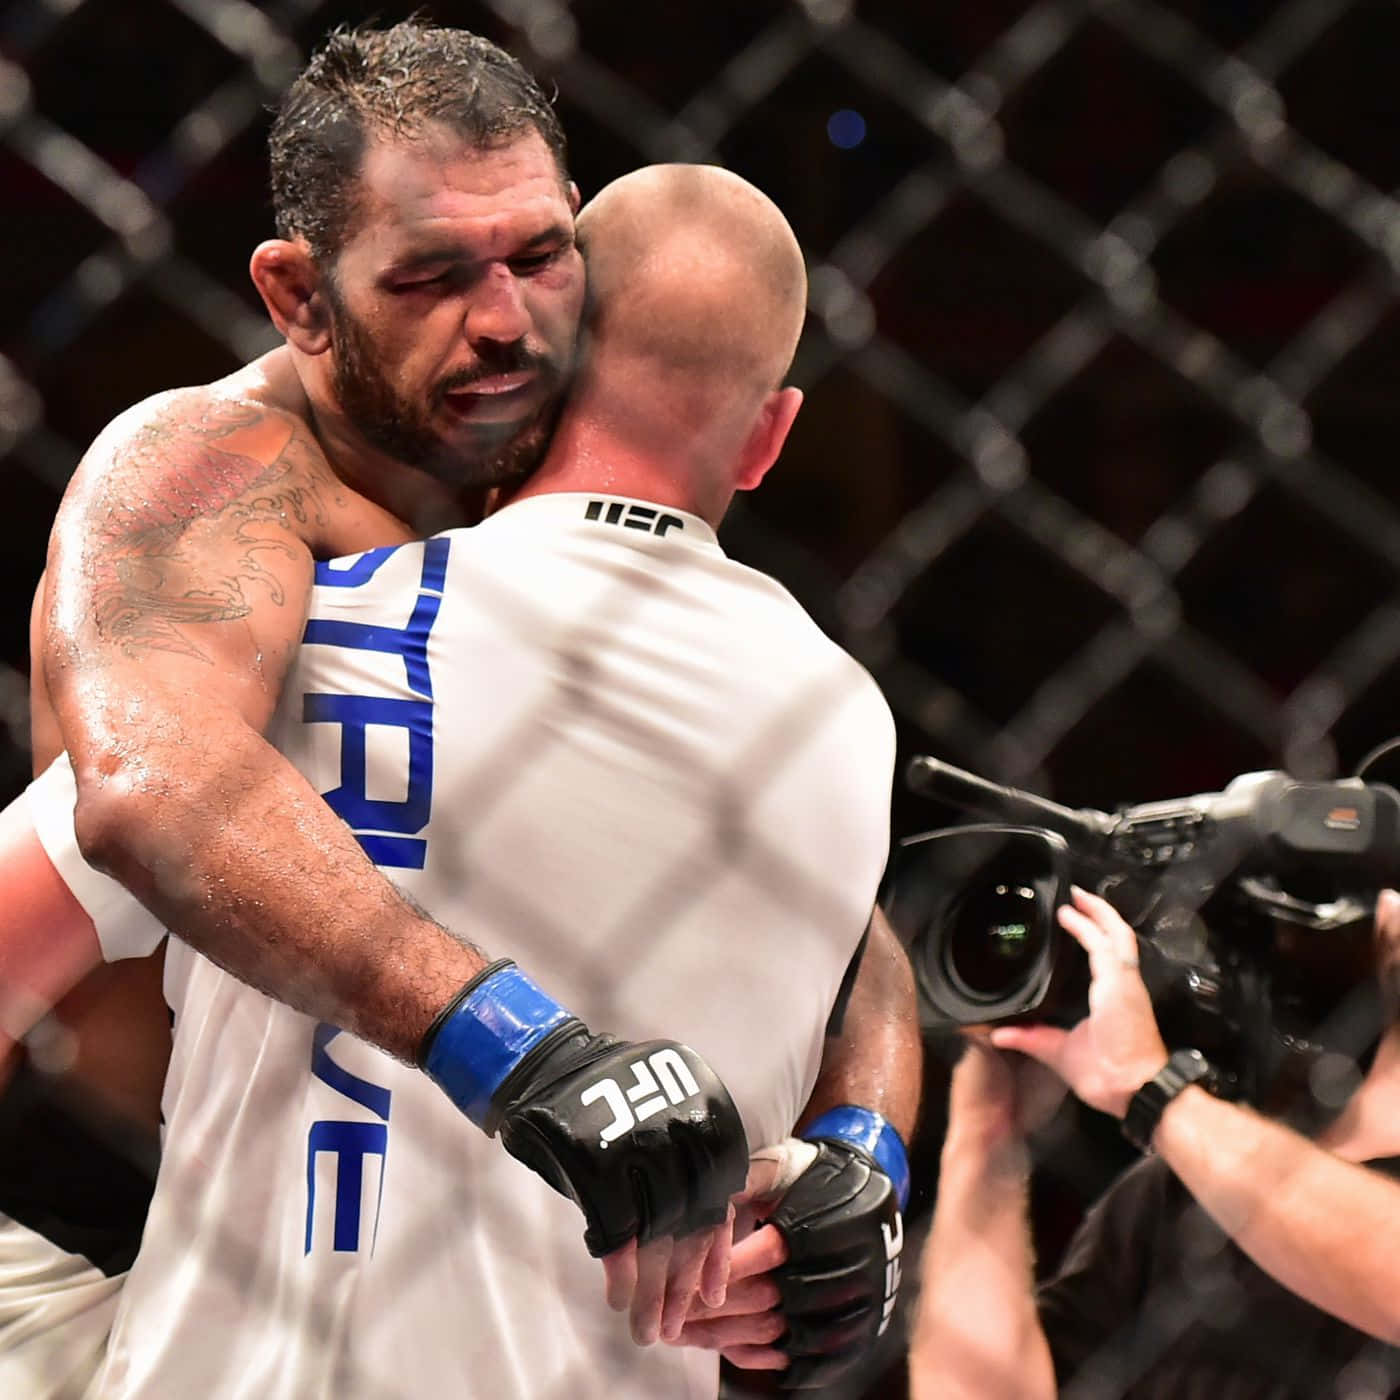 Mixed Martial Arts Pro, Antonio Rogerio Nogueira, Exhausted after Intense Fight Wallpaper